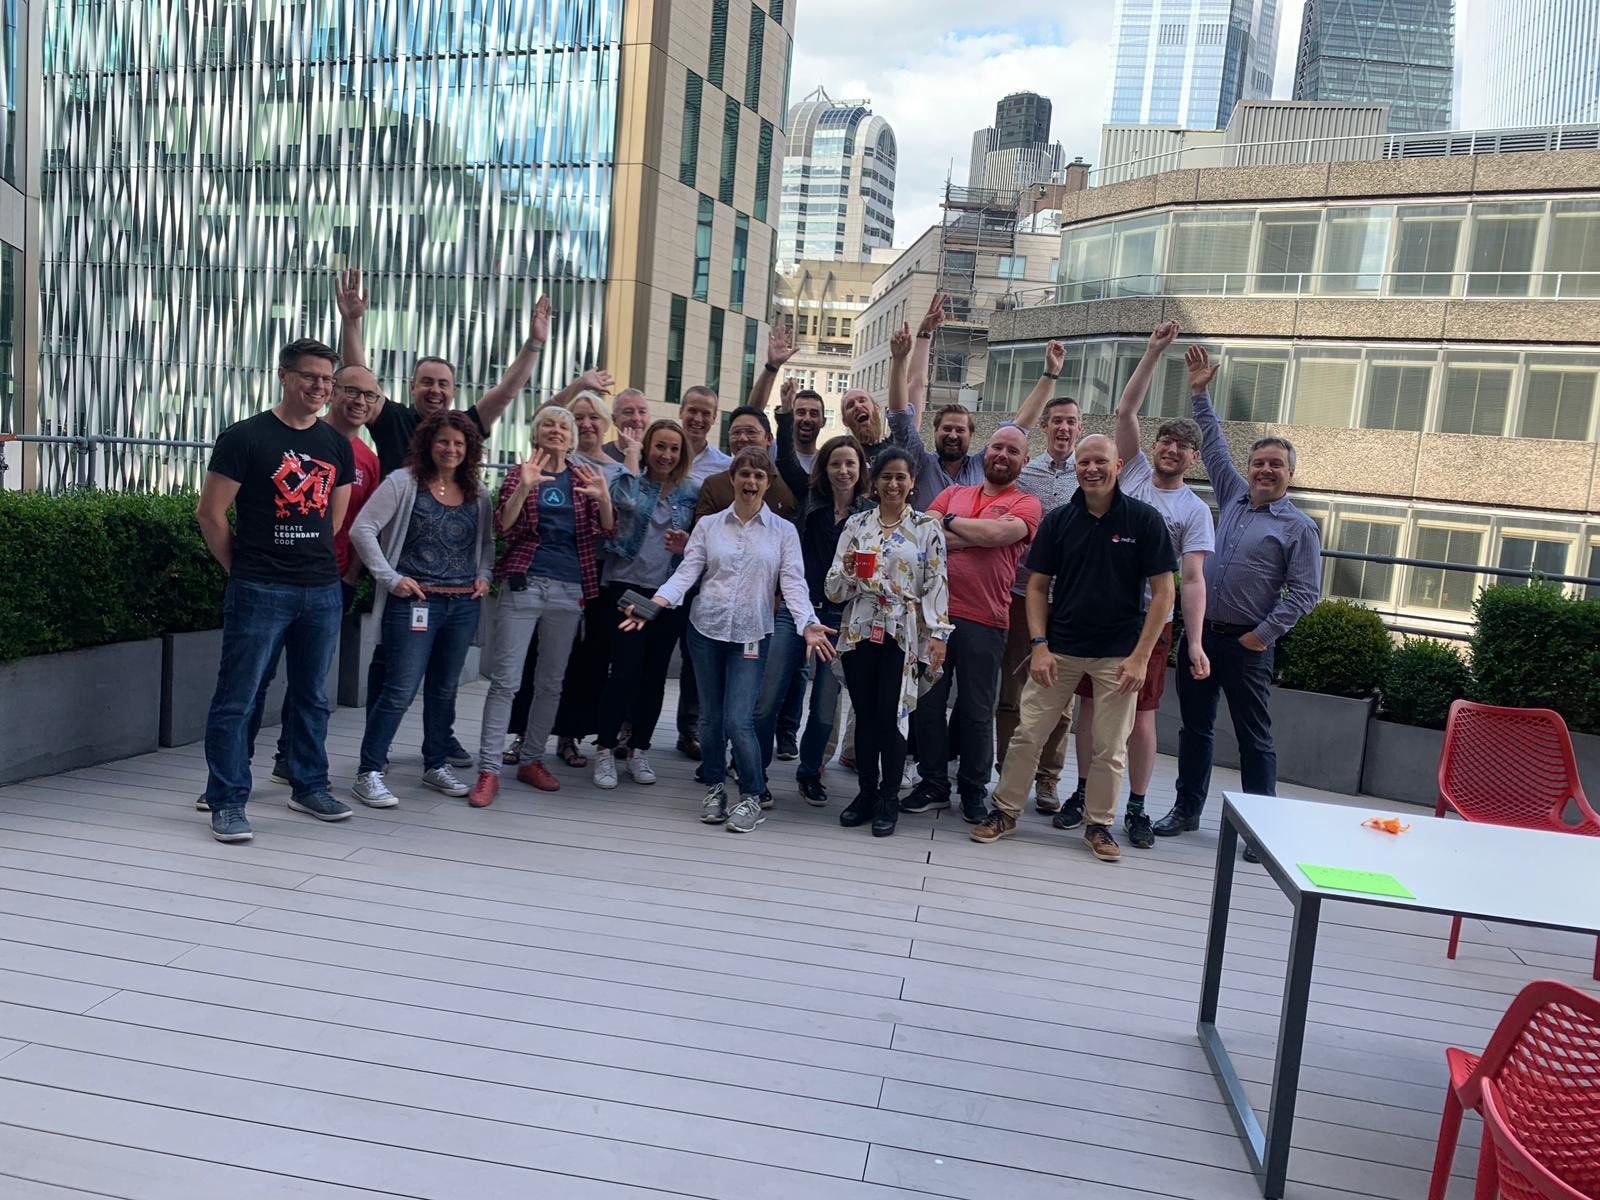   Some of the EMEA Labs Team on the balcony of Red Hat's London Office.